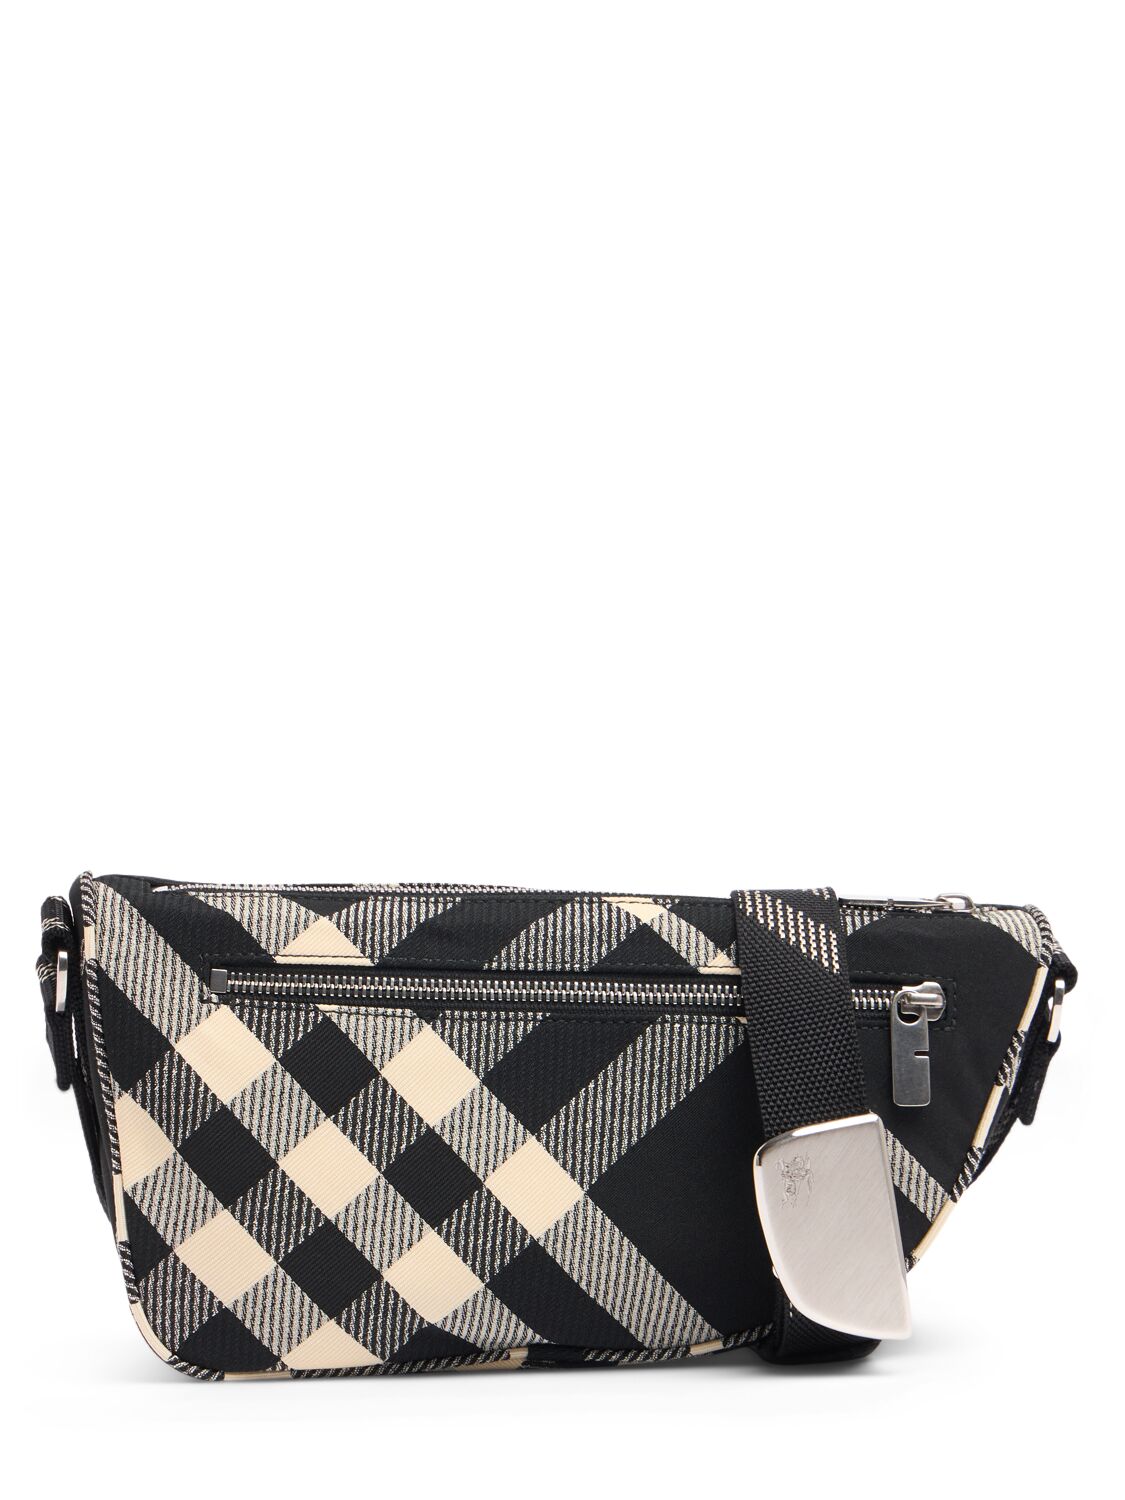 Burberry Maderia Check Shield Small Shoulder Bag In Black